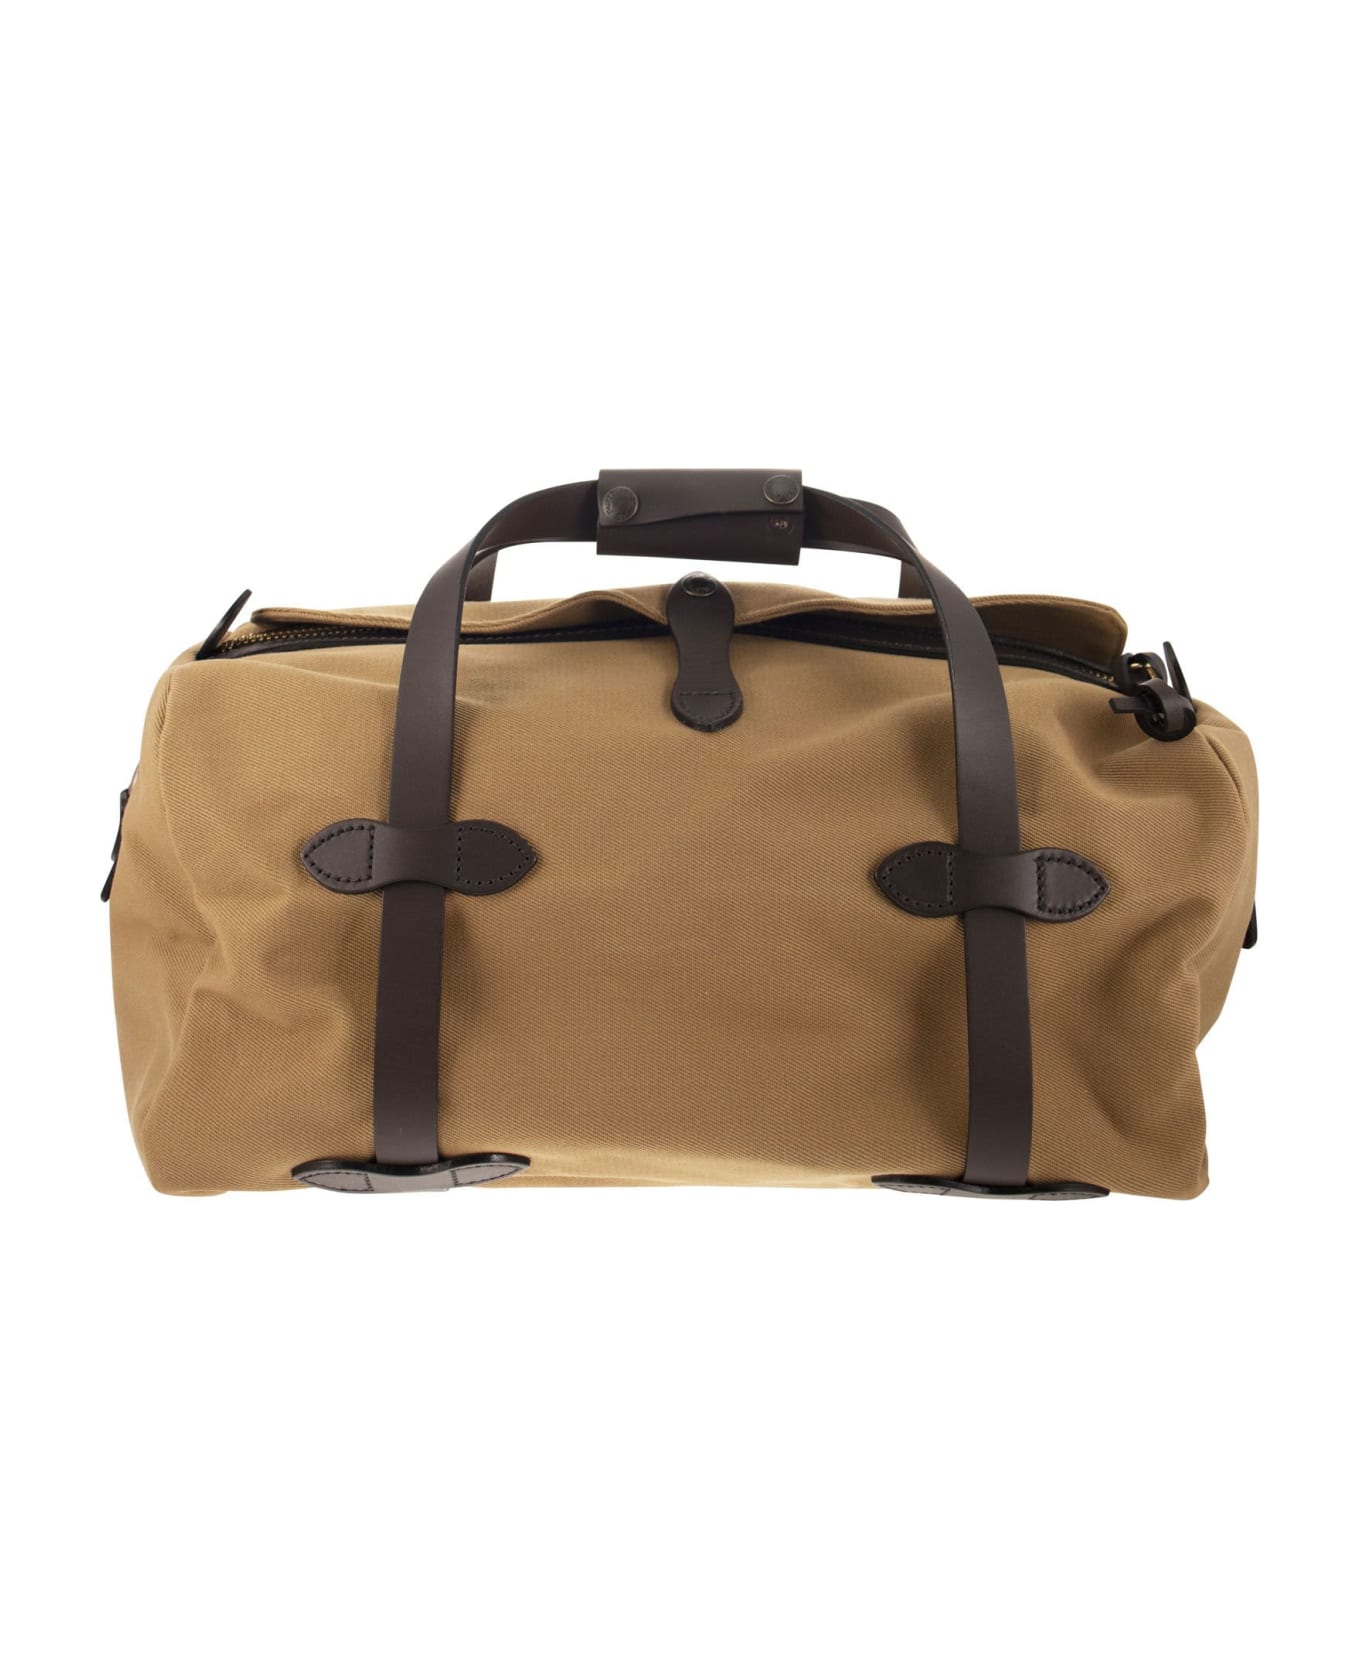 Filson Duffle - Small Duffle Bag With Leather Trim - Beige